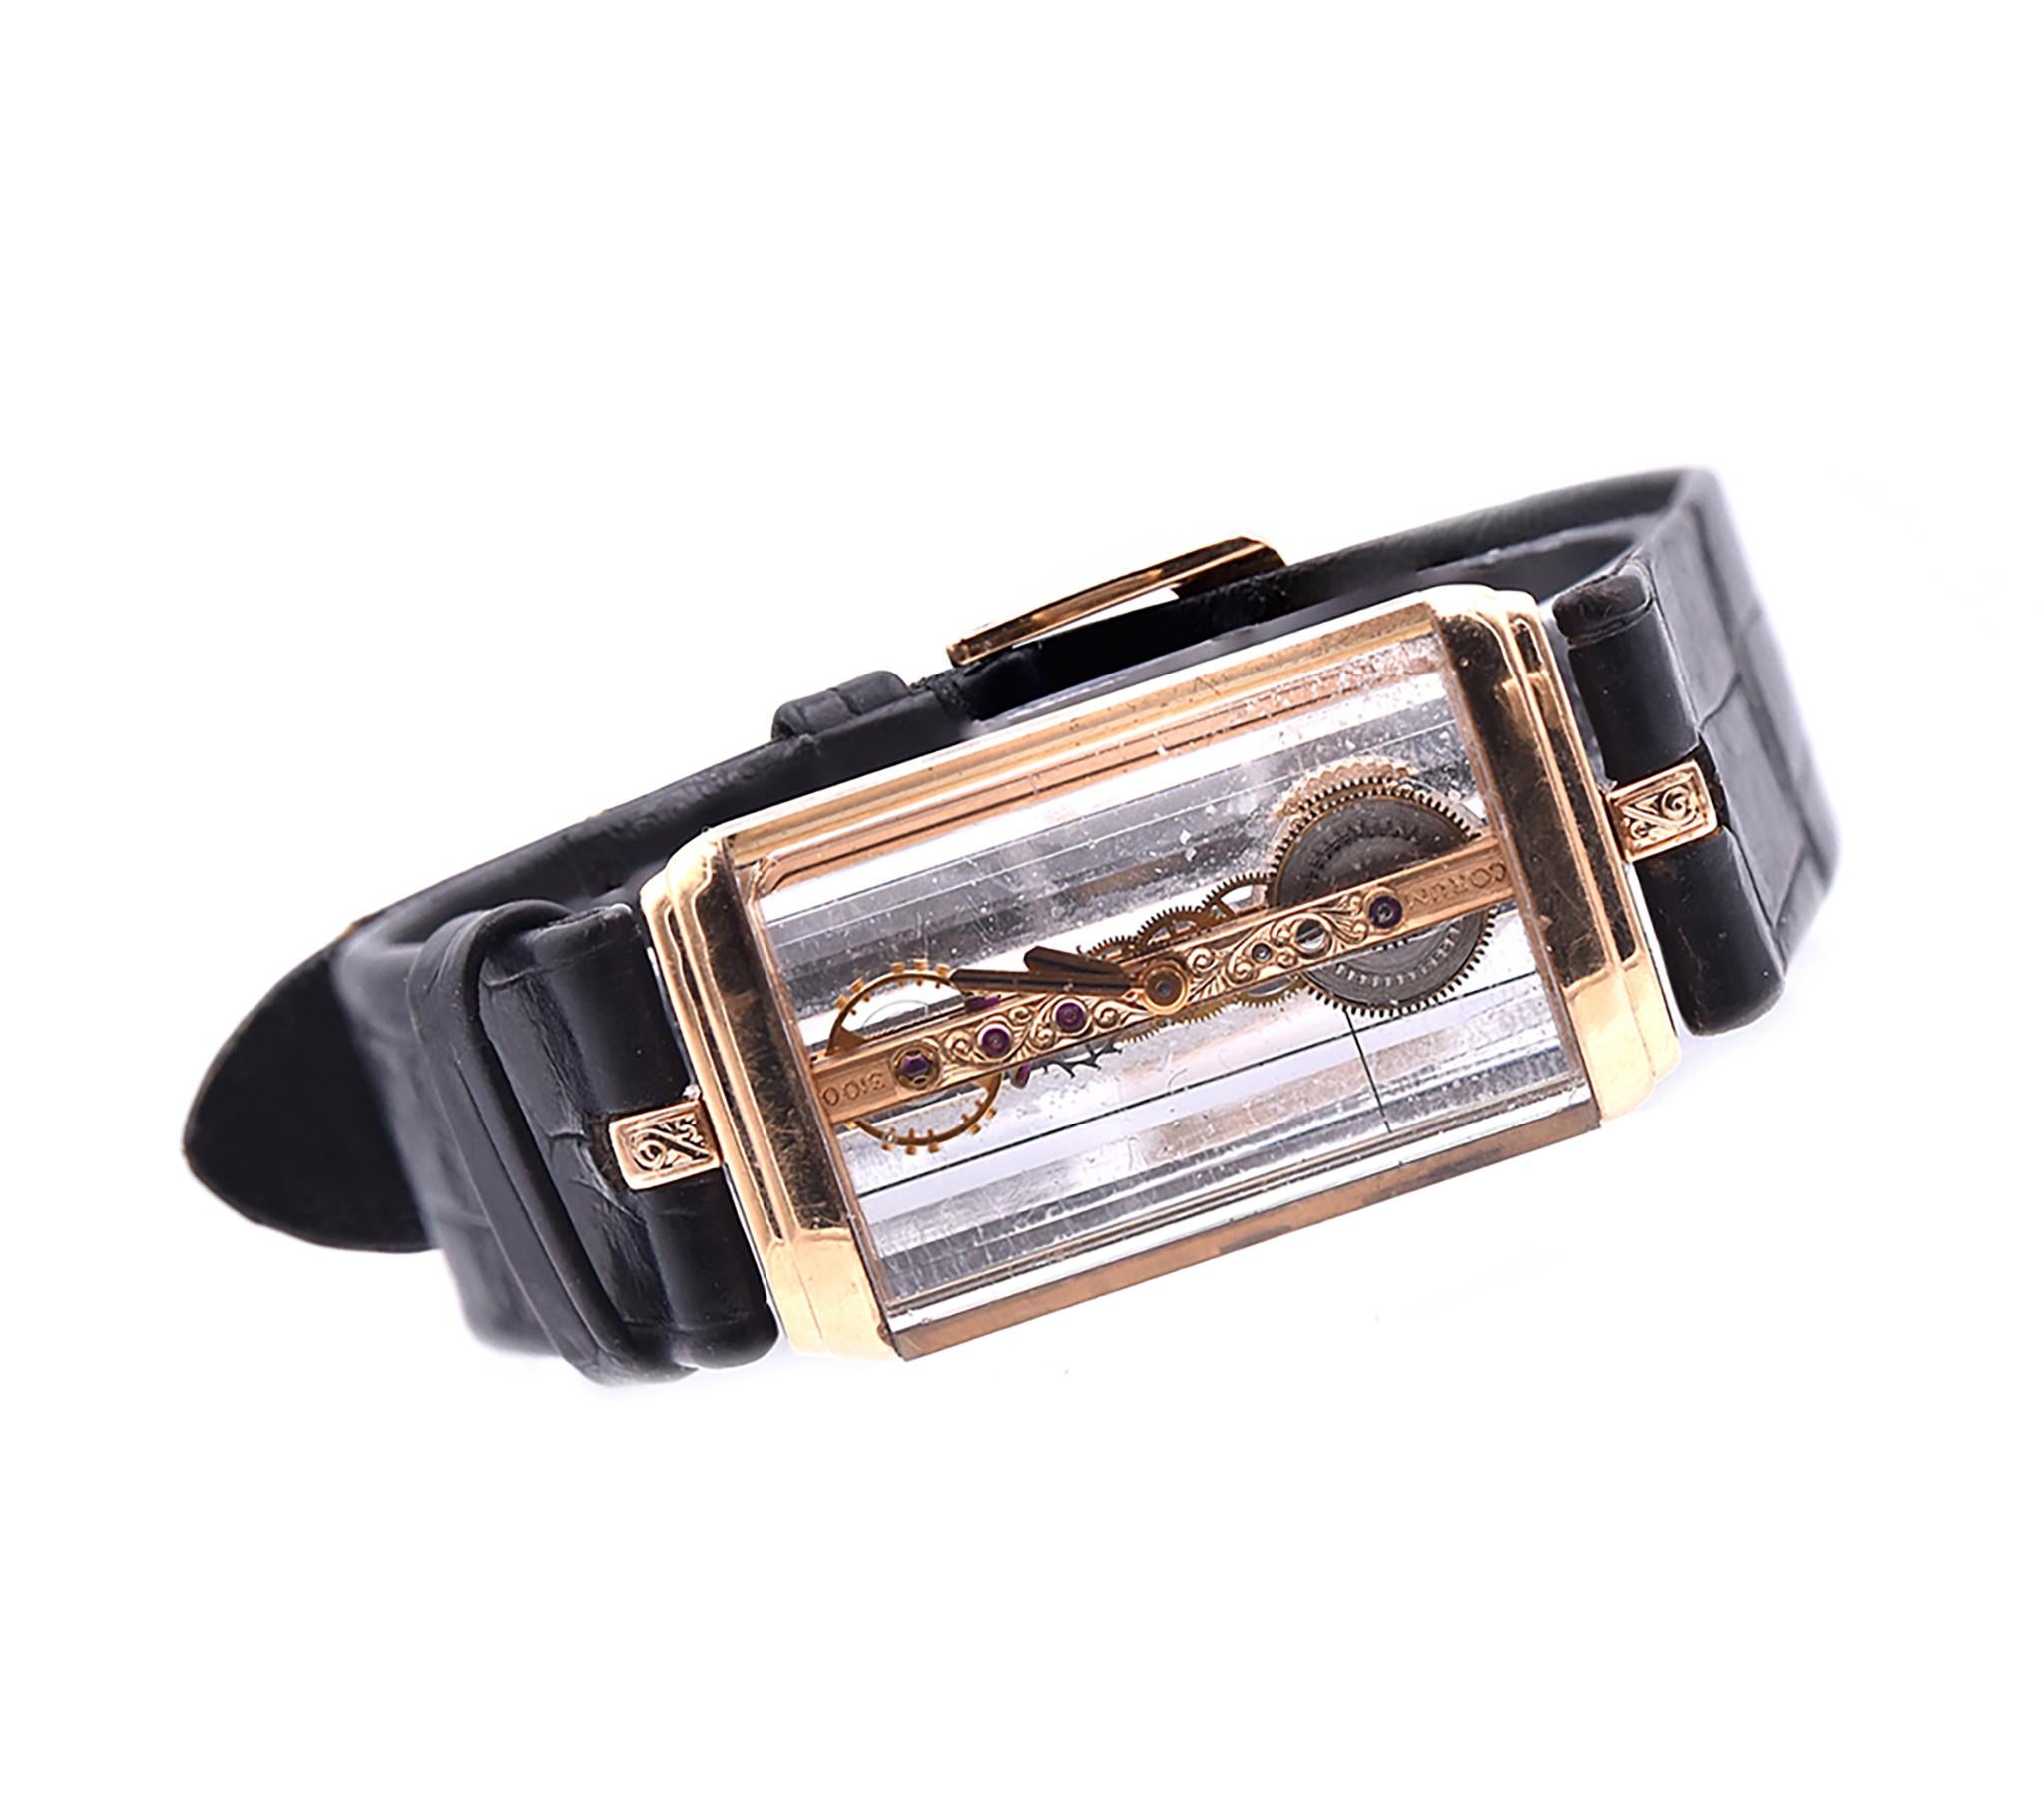 Movement: manual wind
Function: hours, minutes
Case: 20 x 34mm 18K yellow gold and Lucite rectangular case, sapphire crystal, push/pull crown
Band: black leather bracelet with buckle
Dial: skeleton dial, gold hands
Reference: 13150
Serial #: